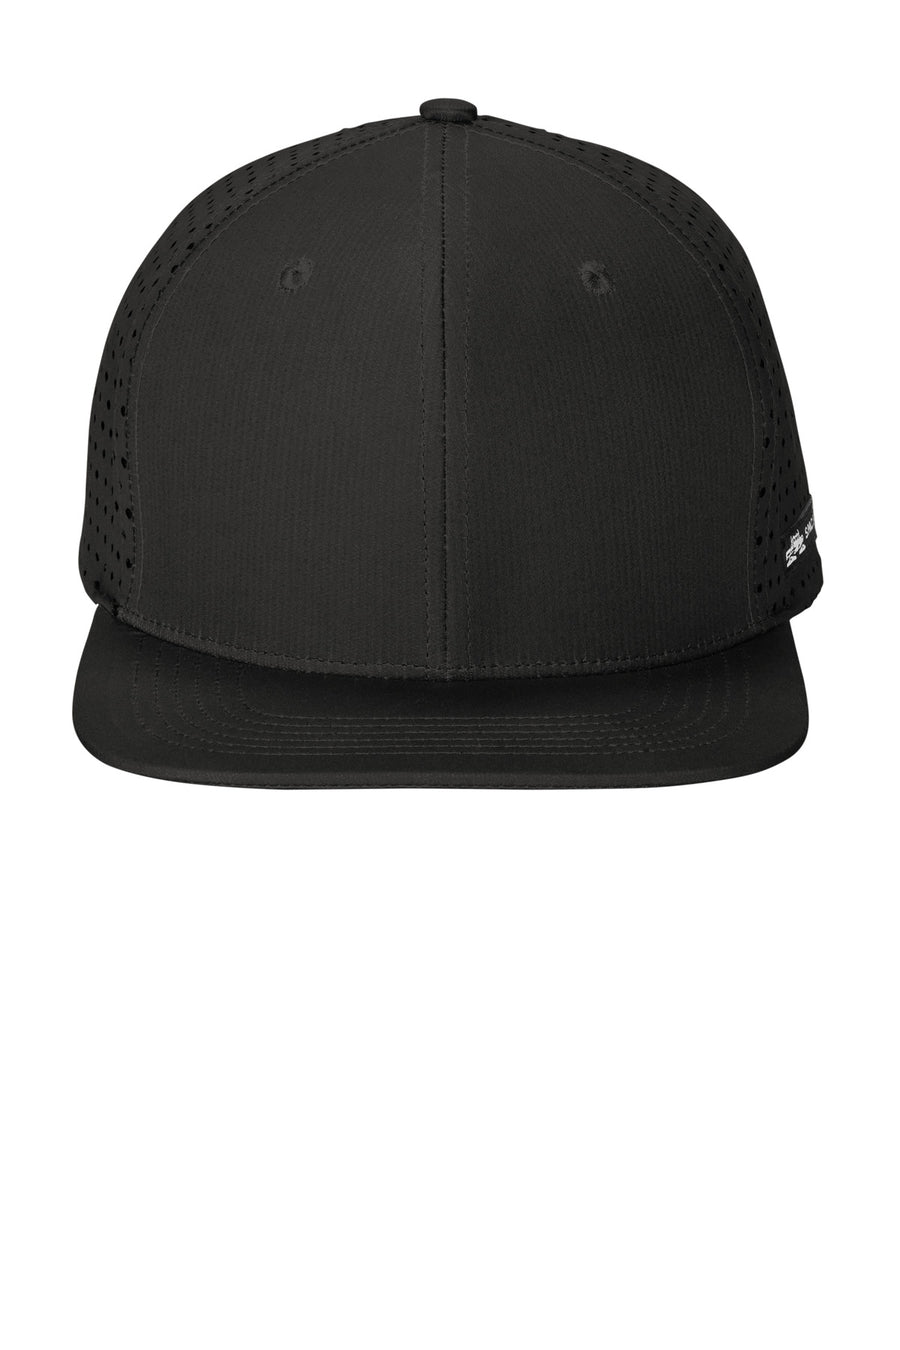 LIMITED EDITION Spacecraft Salish Perforated Cap